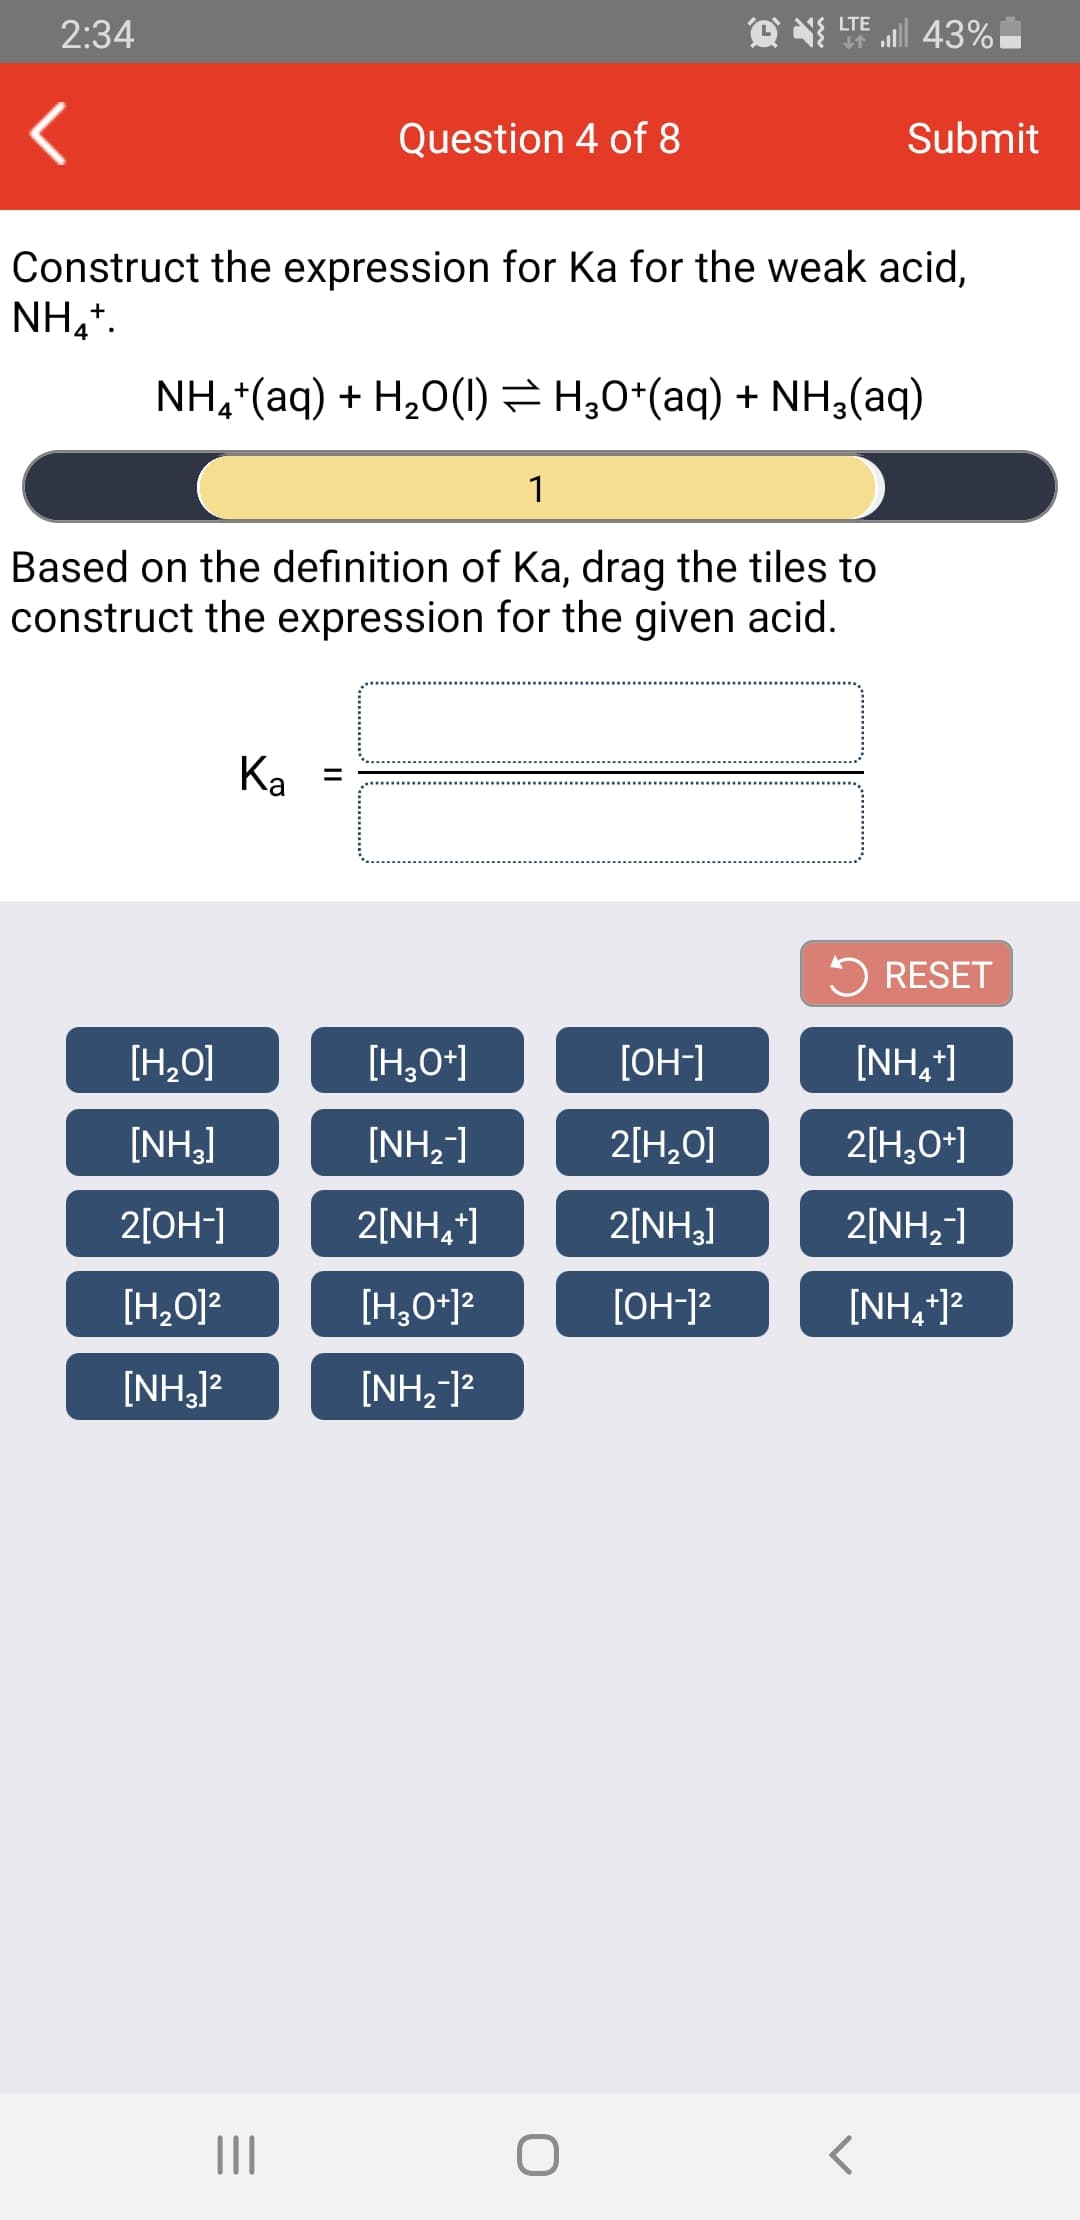 all 43%
LTE
2:34
Question 4 of 8
Submit
Construct the expression for Ka for the weak acid,
NH,*.
NH,*(aq) + H,0(10) = H,0*(aq) + NH;(aq)
1
Based on the definition of Ka, drag the tiles to
construct the expression for the given acid.
Ka
%3D
5 RESET
[H,O]
[H,O*]
[OH-]
[NH,]
[NH,]
[NH,]
2[H,0O]
2[H,0*]
2[OH-]
2[NH,]
2[NH,]
2[NH,]
[H,0]?
[H,0*12
[OH-]?
[NH,*)?
[NH,]?
[NH,-]?
II
